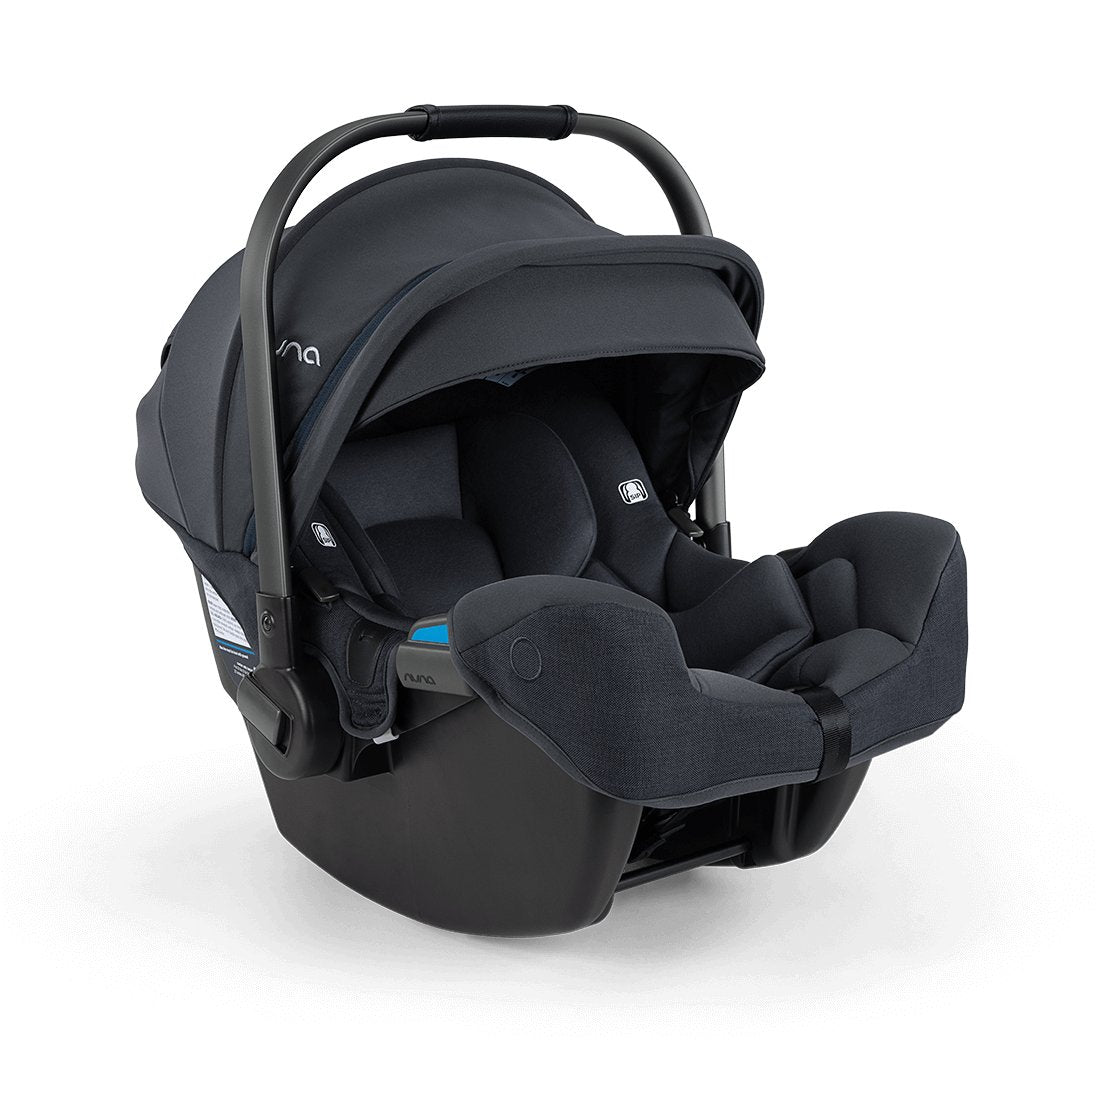 NUNA Pipa RX Infant Car Seat With RELX Base - ANB Baby -8720874760436$300 - $500